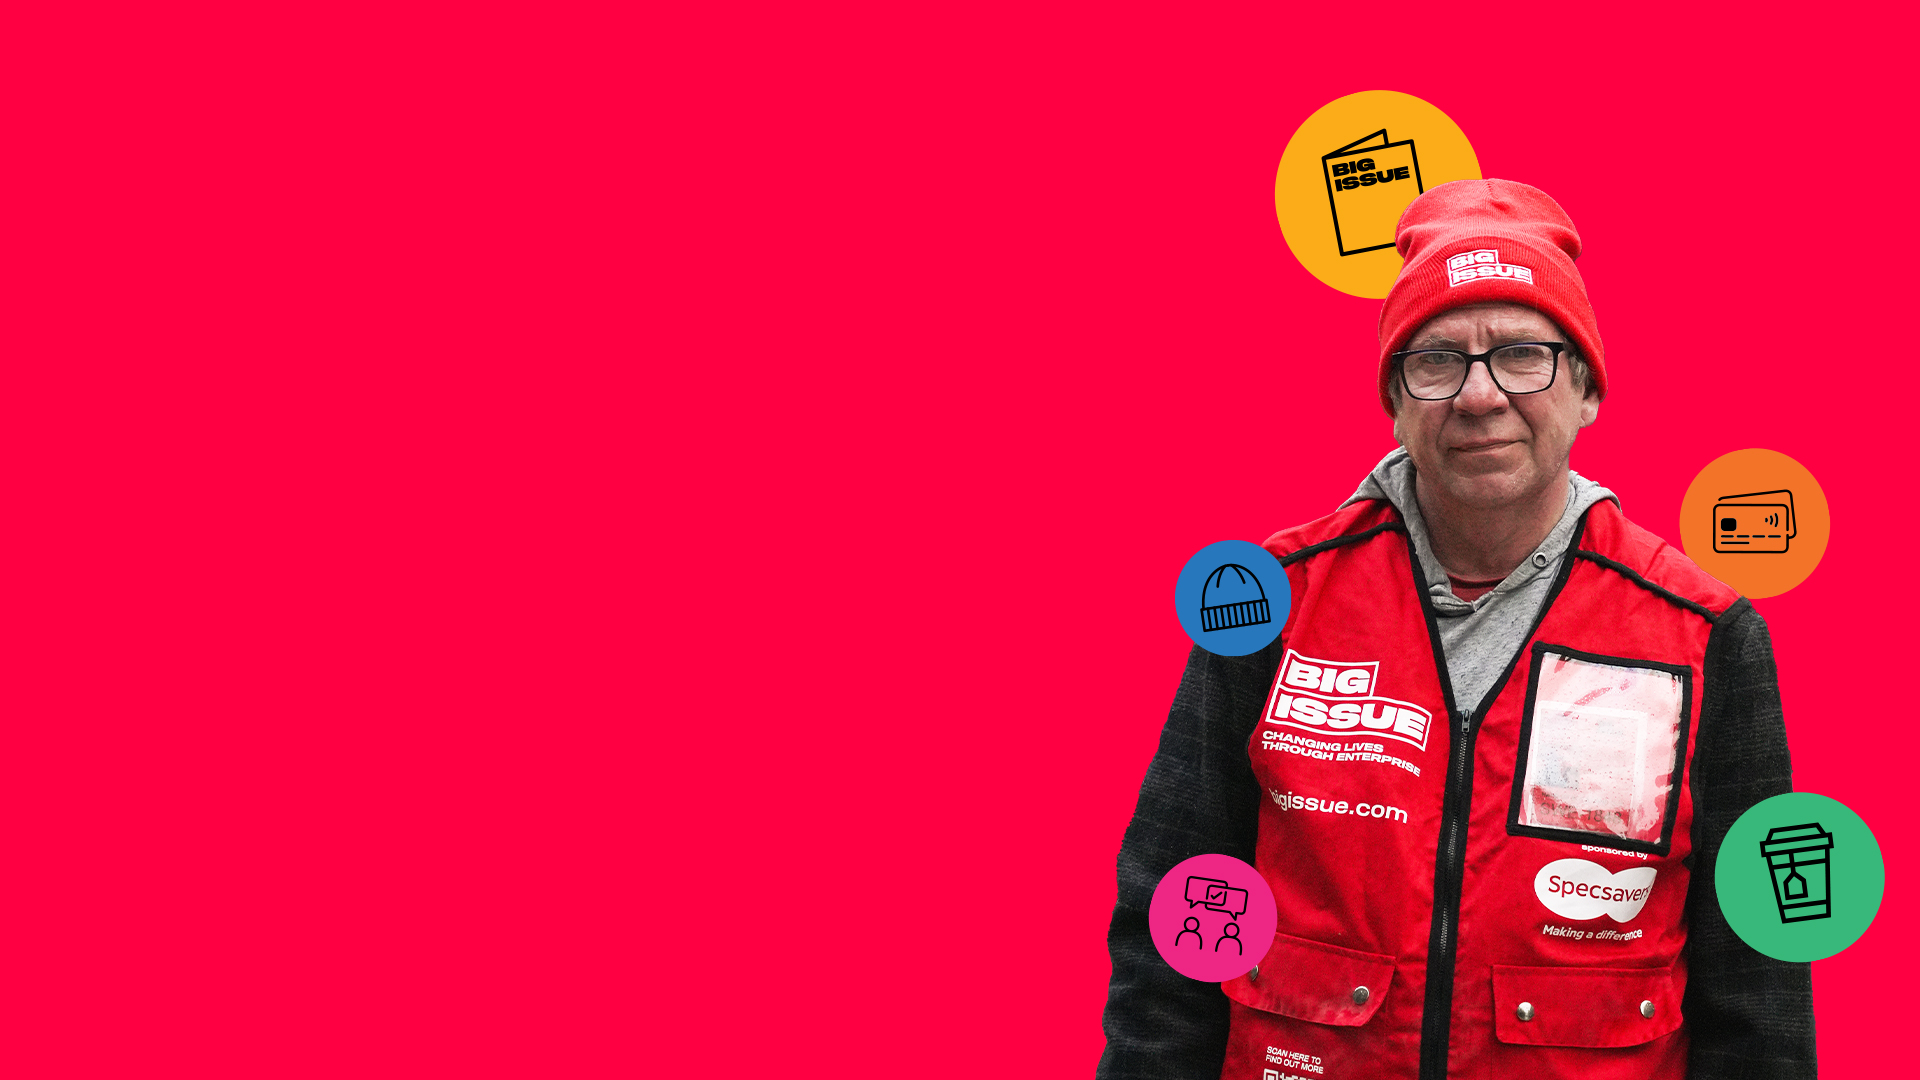 big issue vendor surrounded by icons showing the different elements of the winter support kit